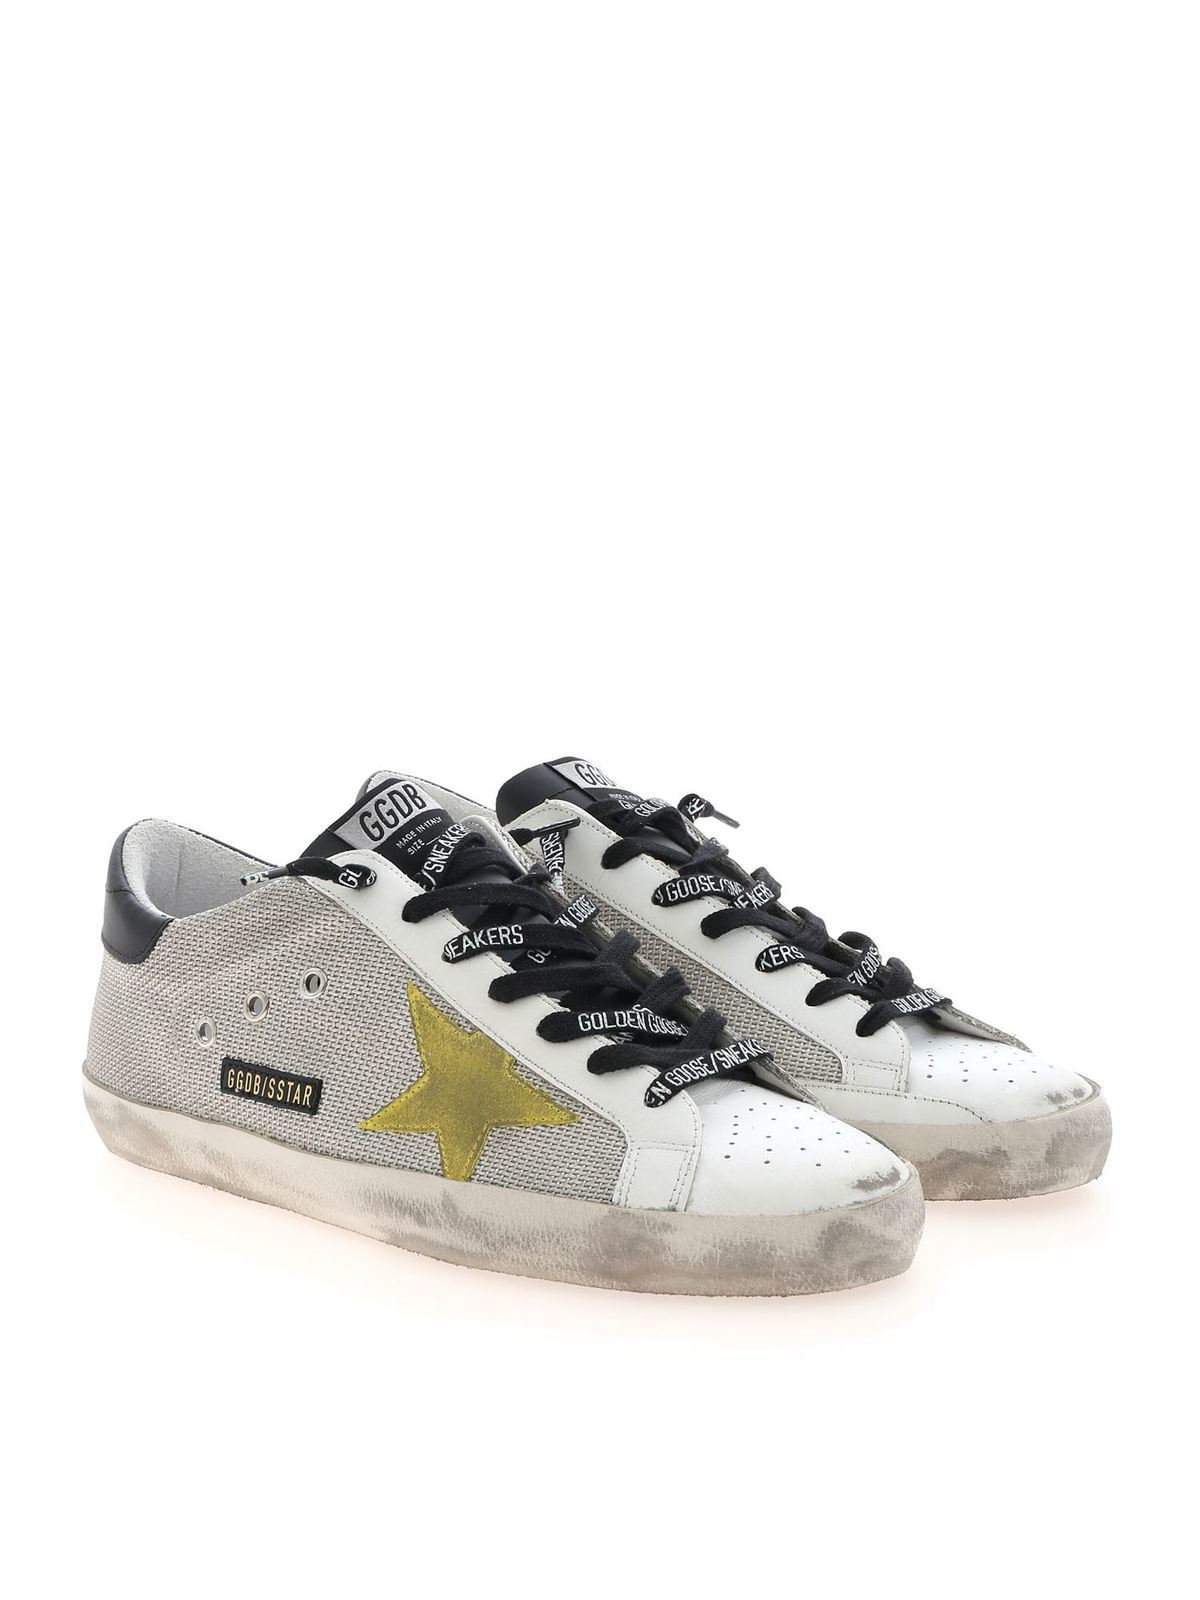 Trainers Golden Goose - Super-Star Classic sneakers in white and grey ...